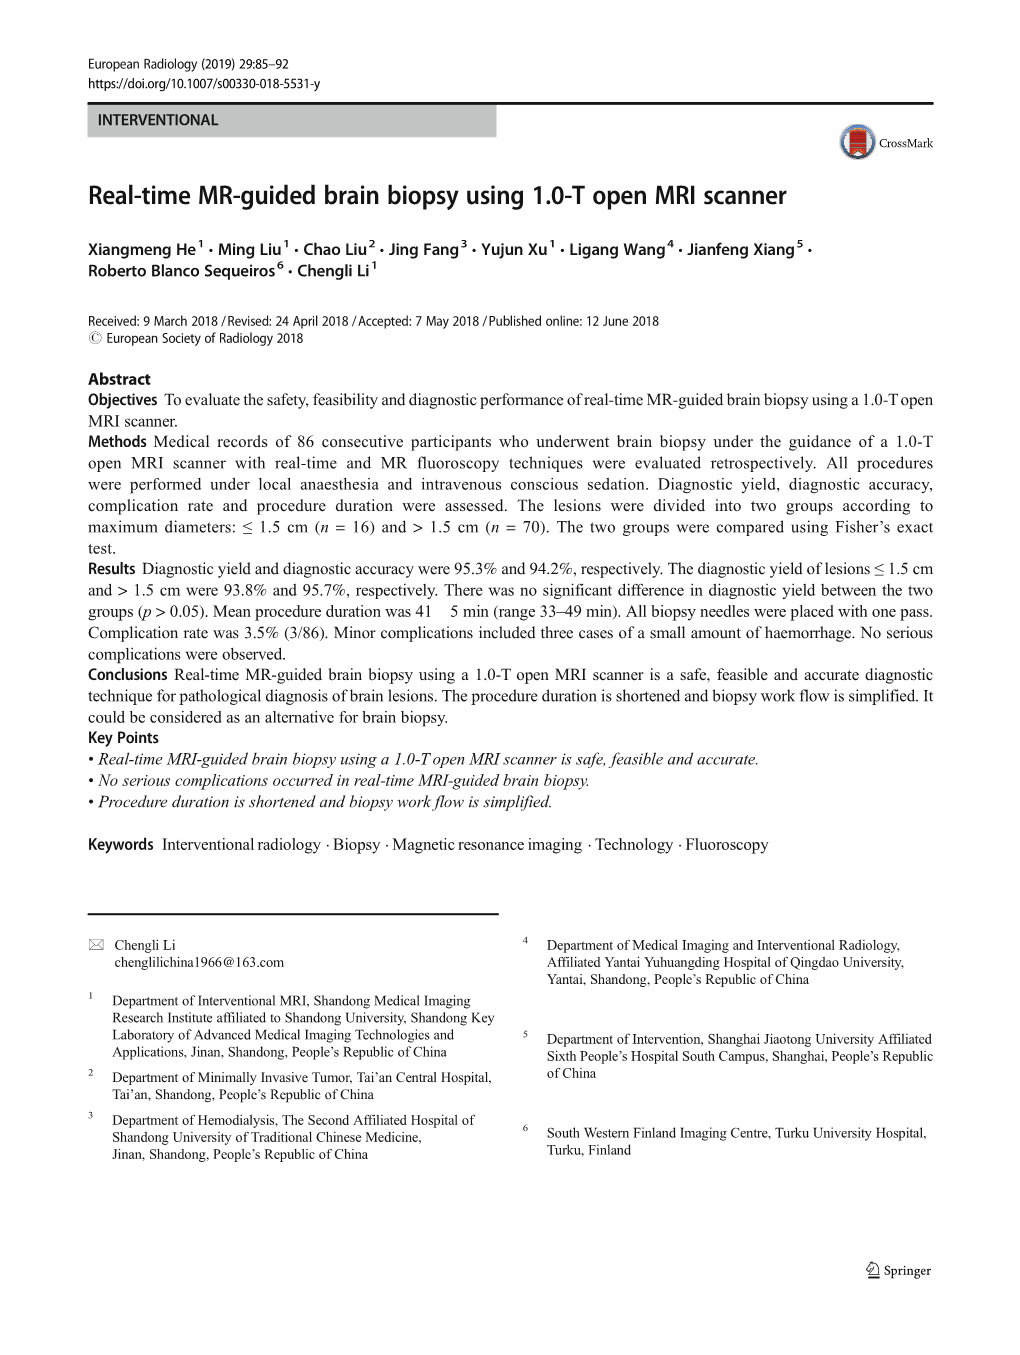 Real-Time MR-Guided Brain Biopsy Using 1.0-T Open MRI Scanner